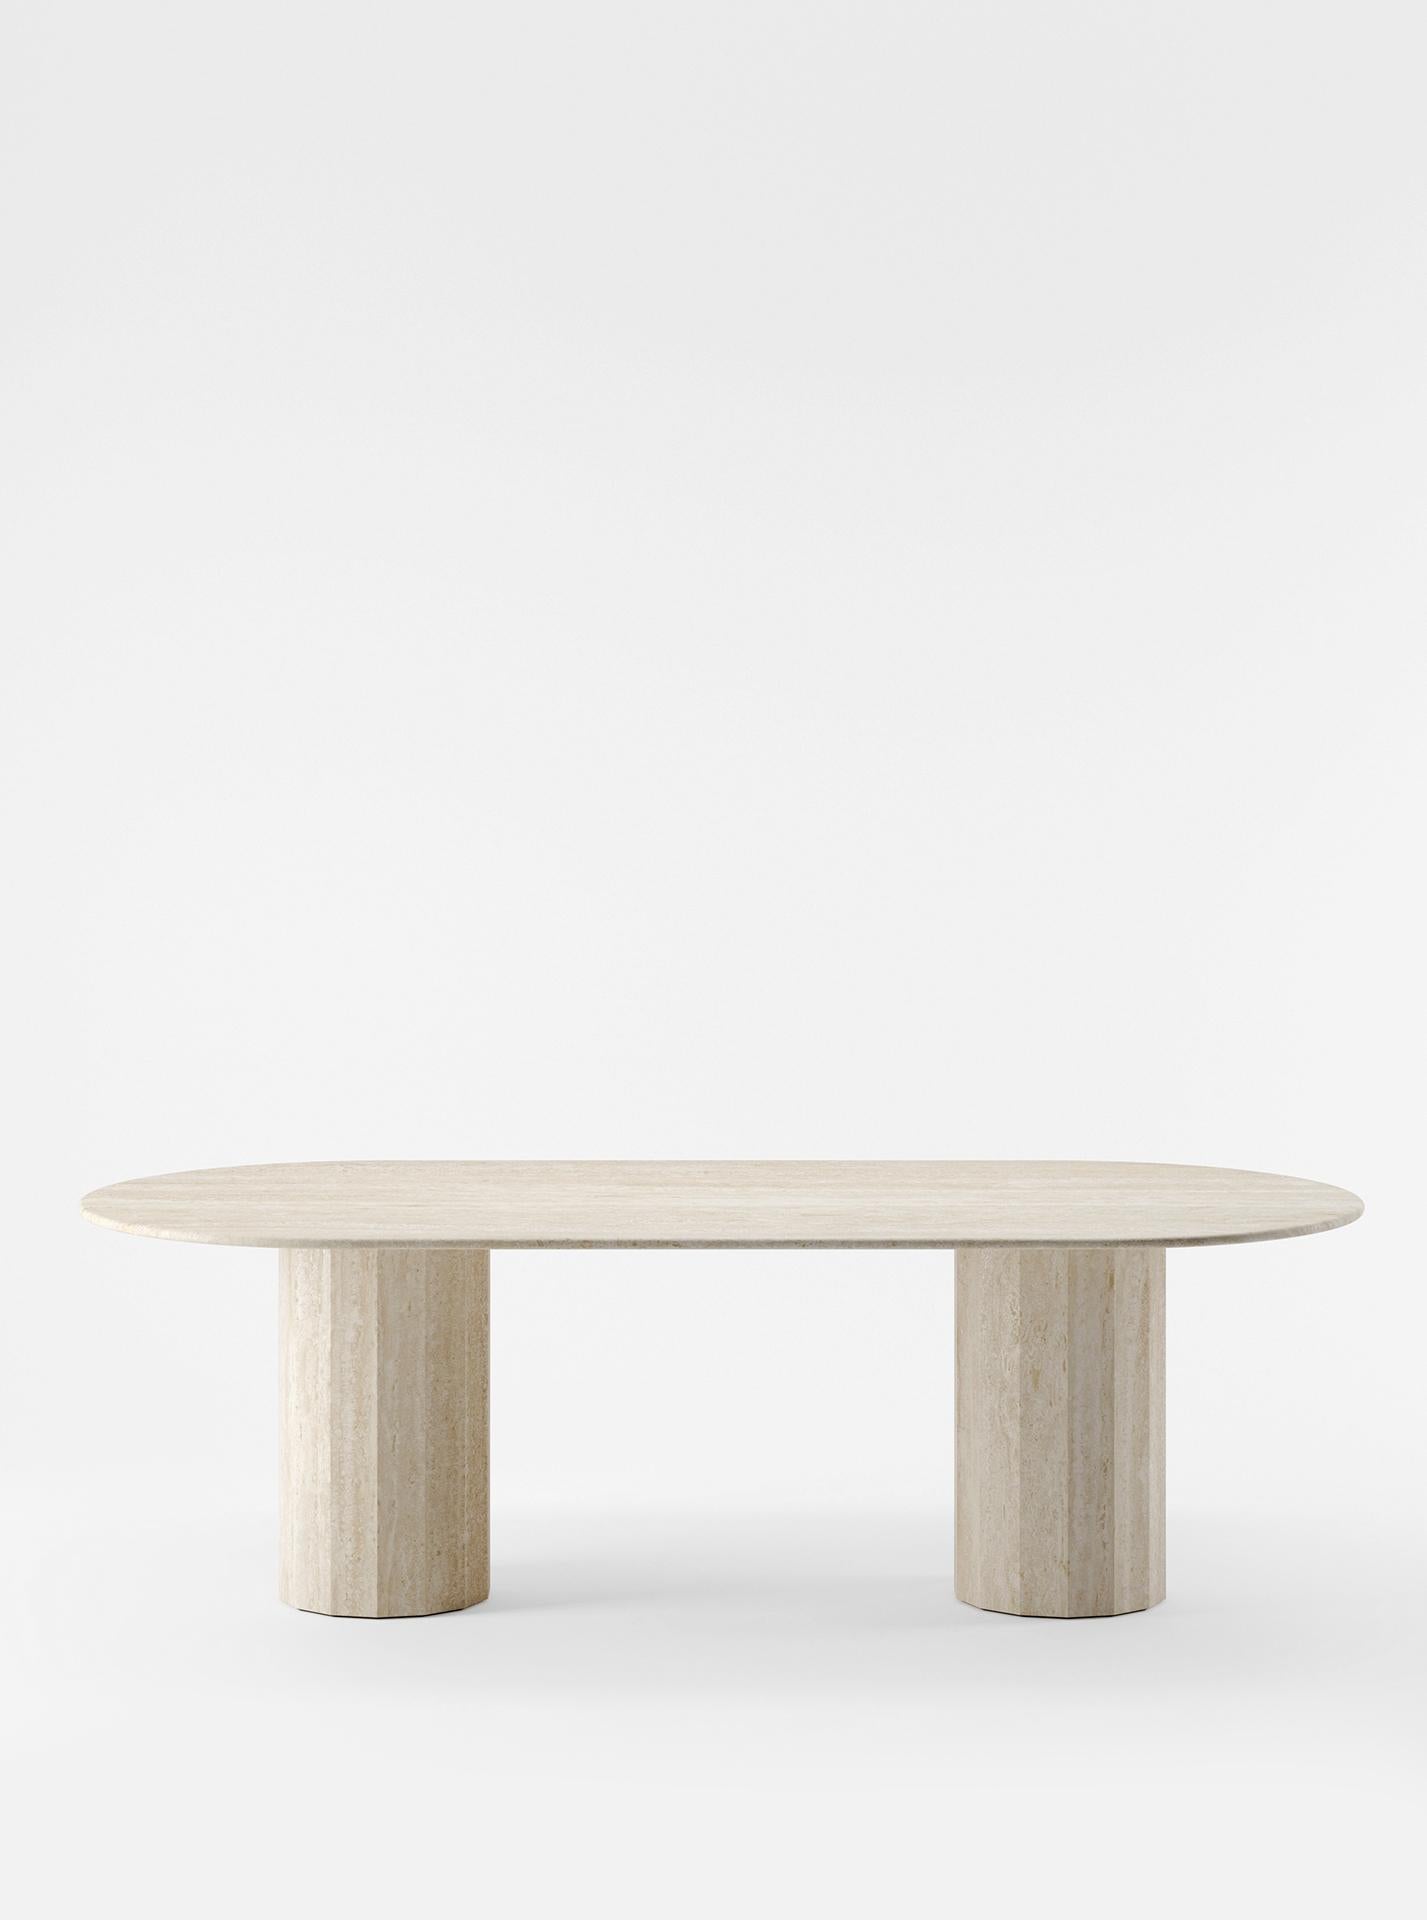 Contemporary Ashby Oval Dining Table in Honed Travertine